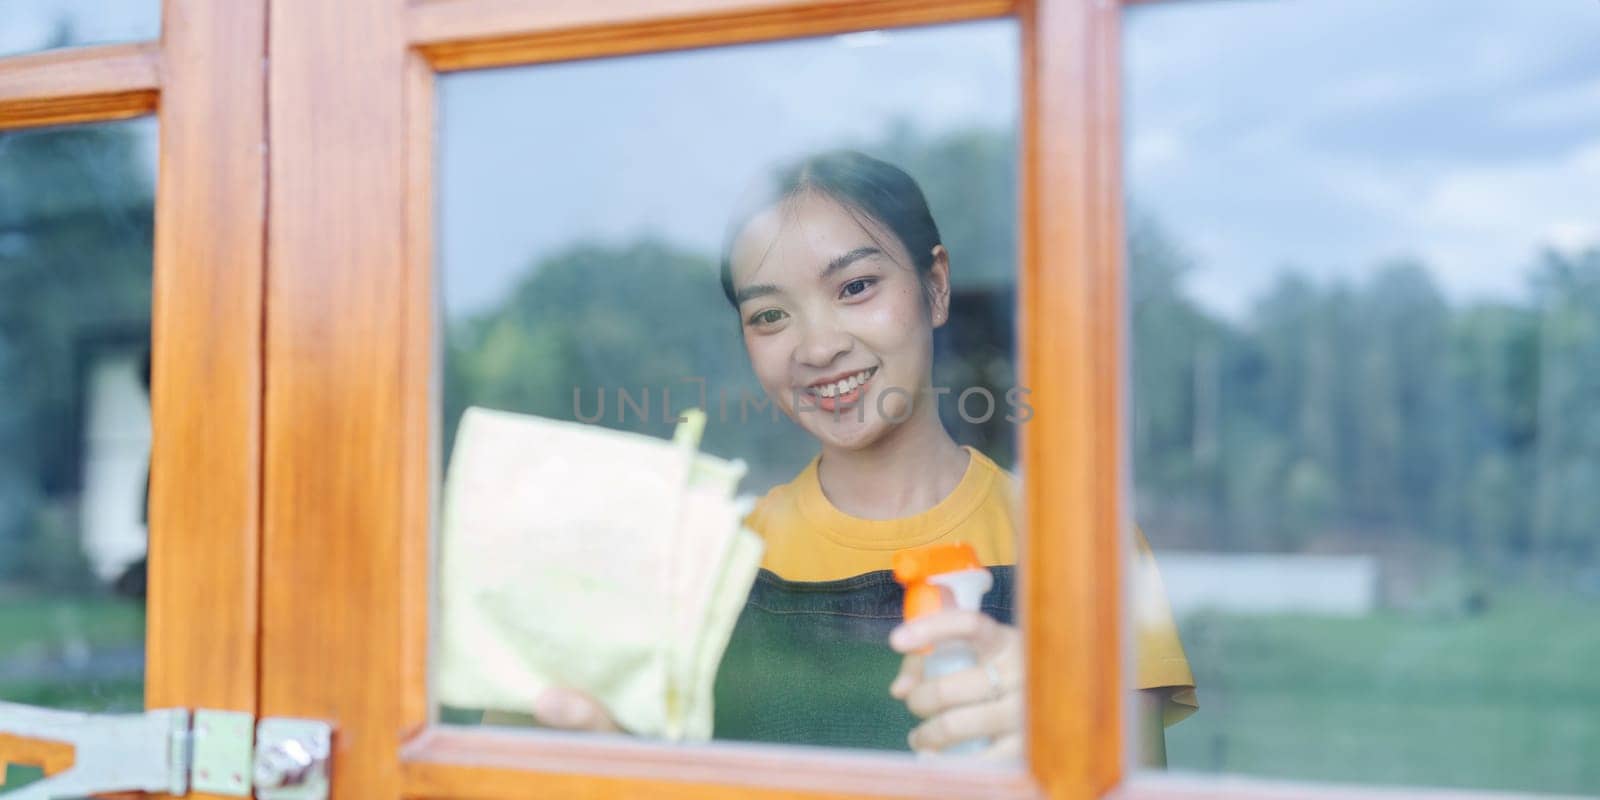 Woman doing household chores and wiping windows in the house on weekends.